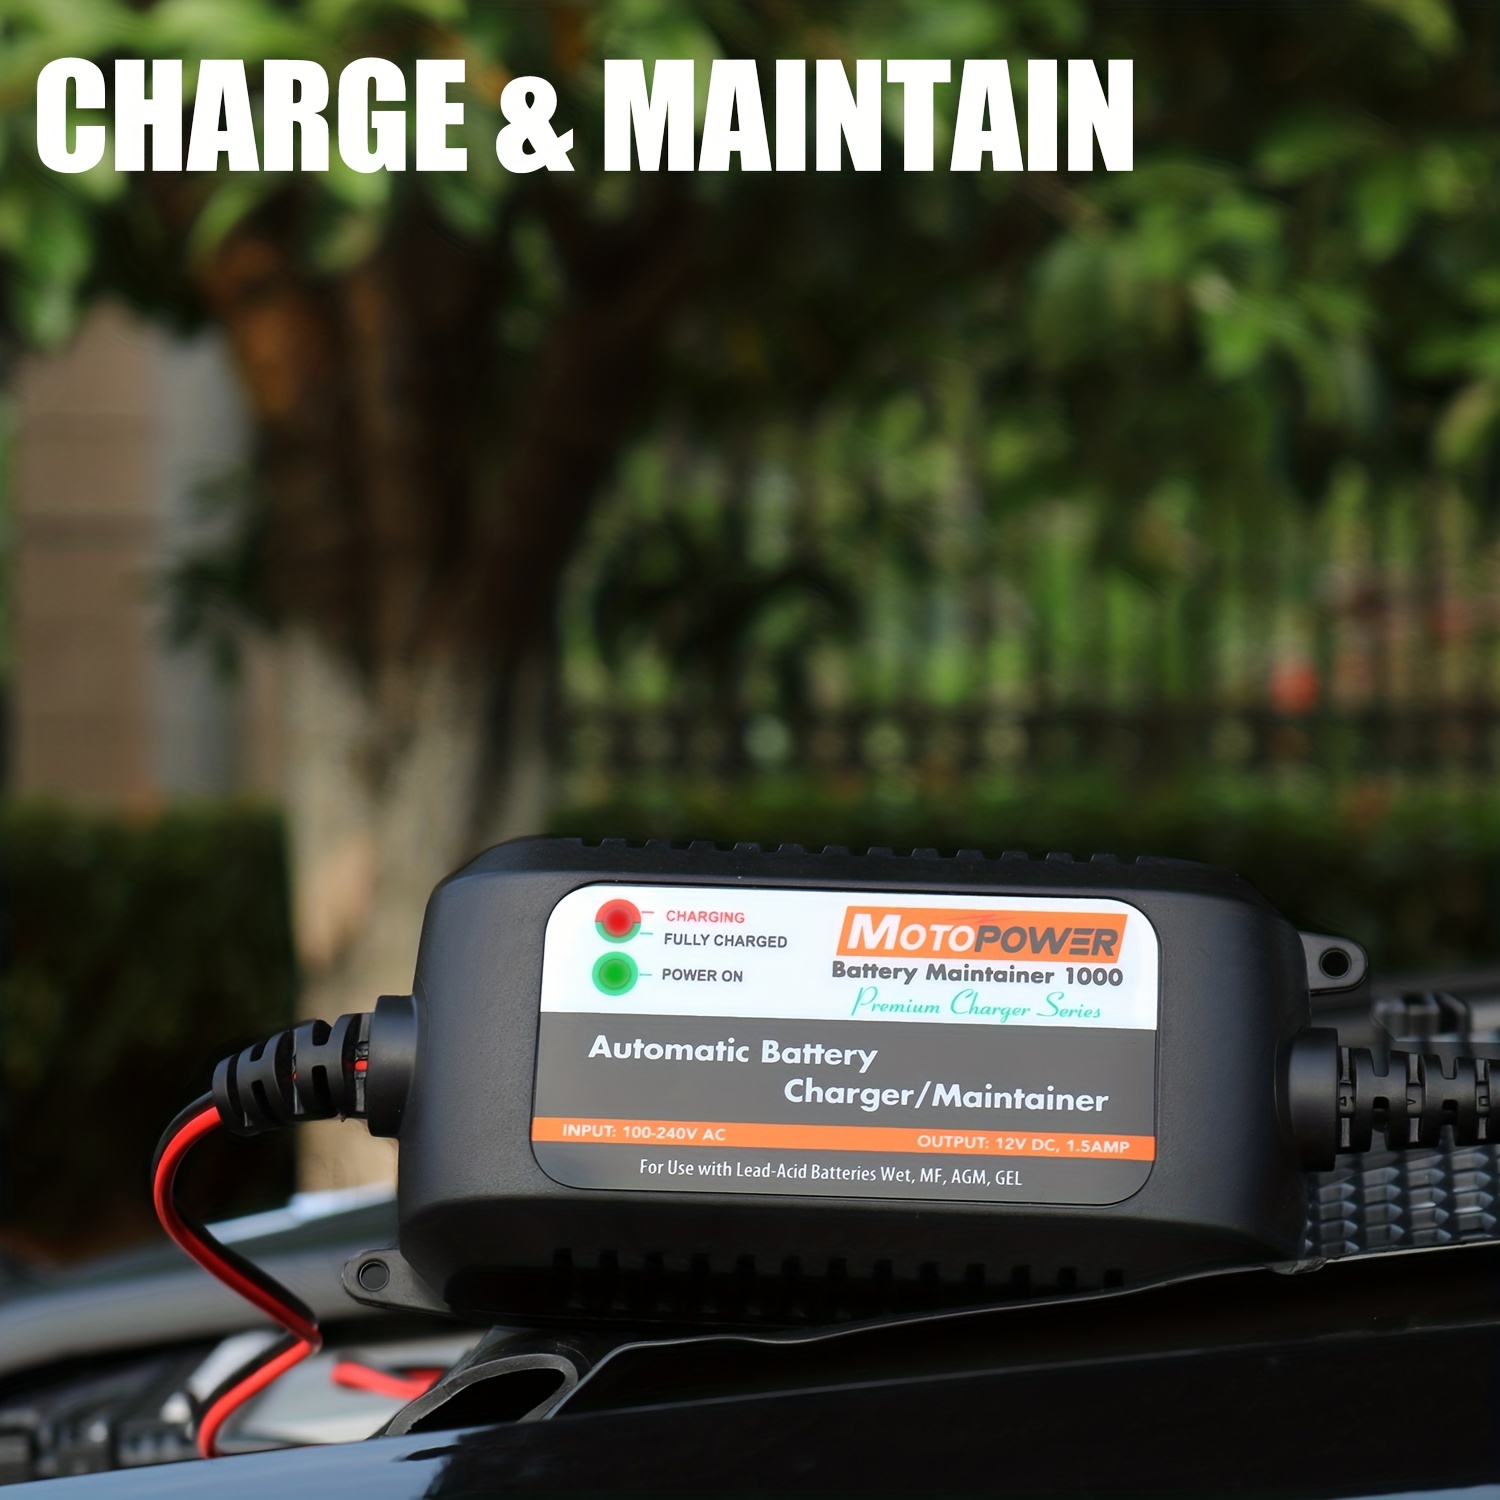 MotoPower MP00205A 12V 800mA Fully Automatic Battery Charger, Maintainer-USA